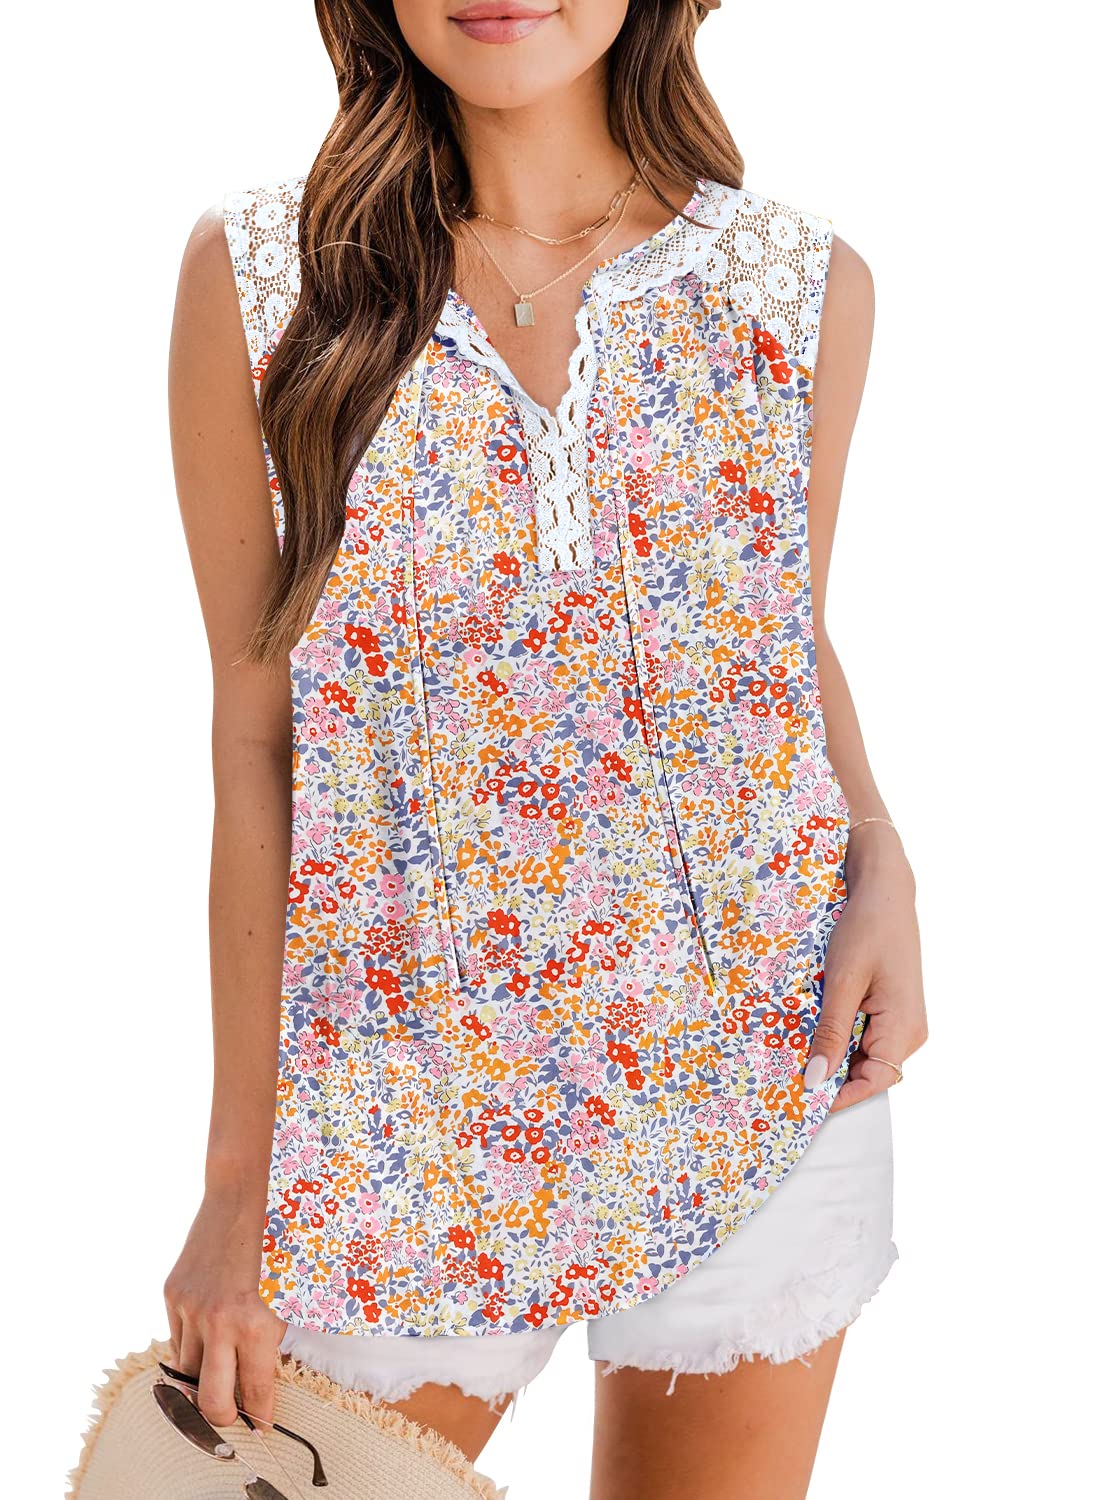 MIHOLL Women's Casual Sleeveless Tops Boho Floral Printed Lace V Neck Tank Top Loose Shirt Blouse